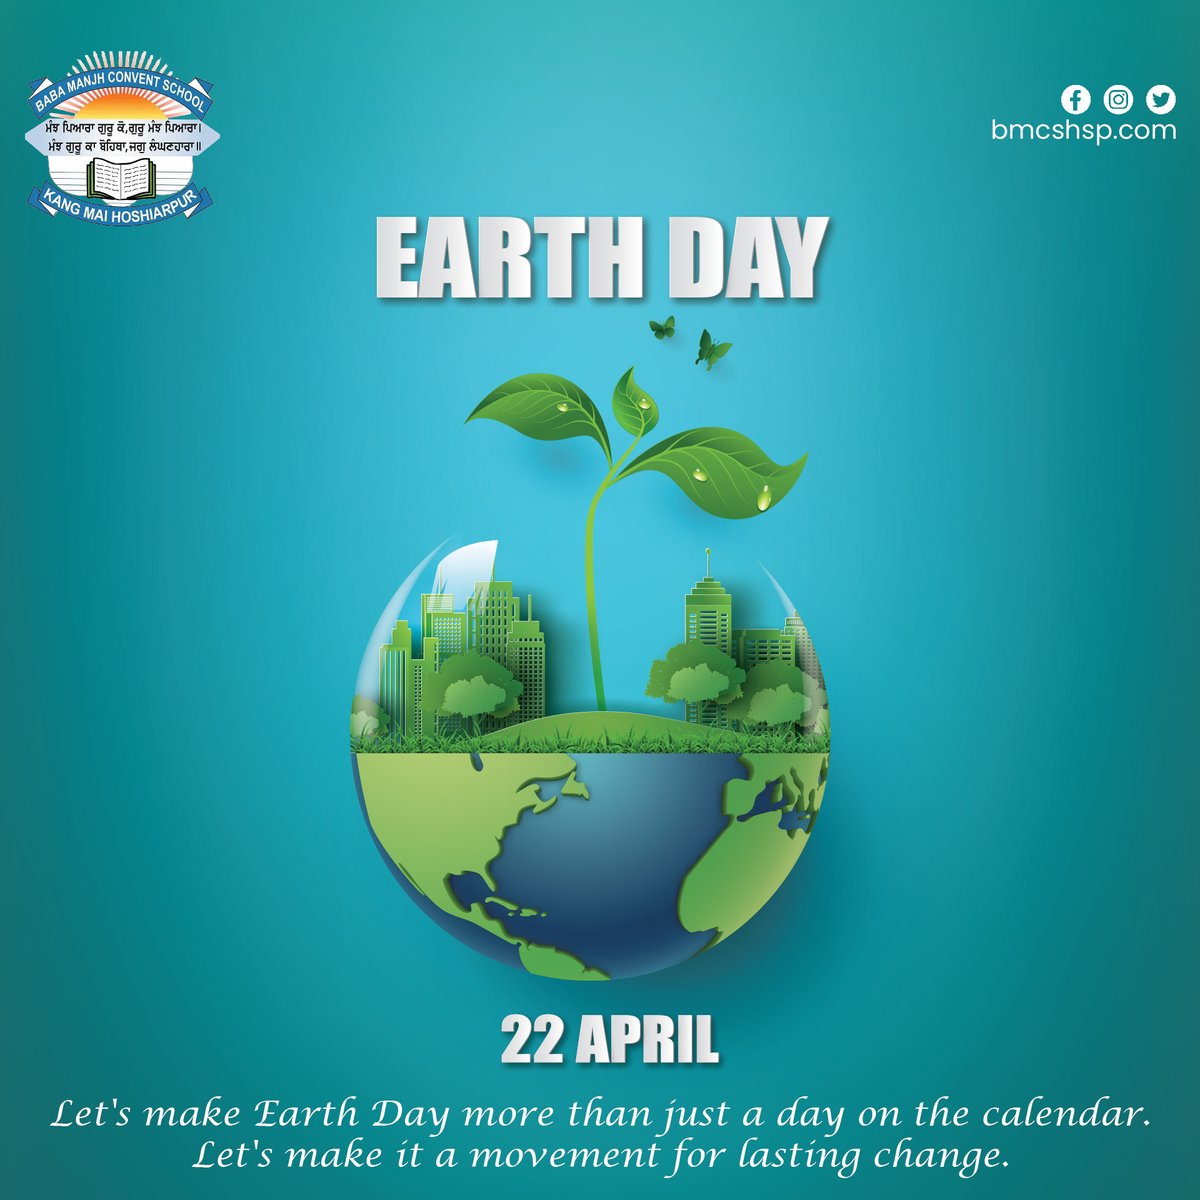 🌎Join us in celebrating Earth Day by taking small steps towards a more sustainable lifestyle. Every action counts🌿🌸 

#EarthDay #SmallStepsBigImpact #NatureIsMagic #BabaManjhConventSchool #CBSEConventSchoolHoshiarpur #ConventSchool #Education